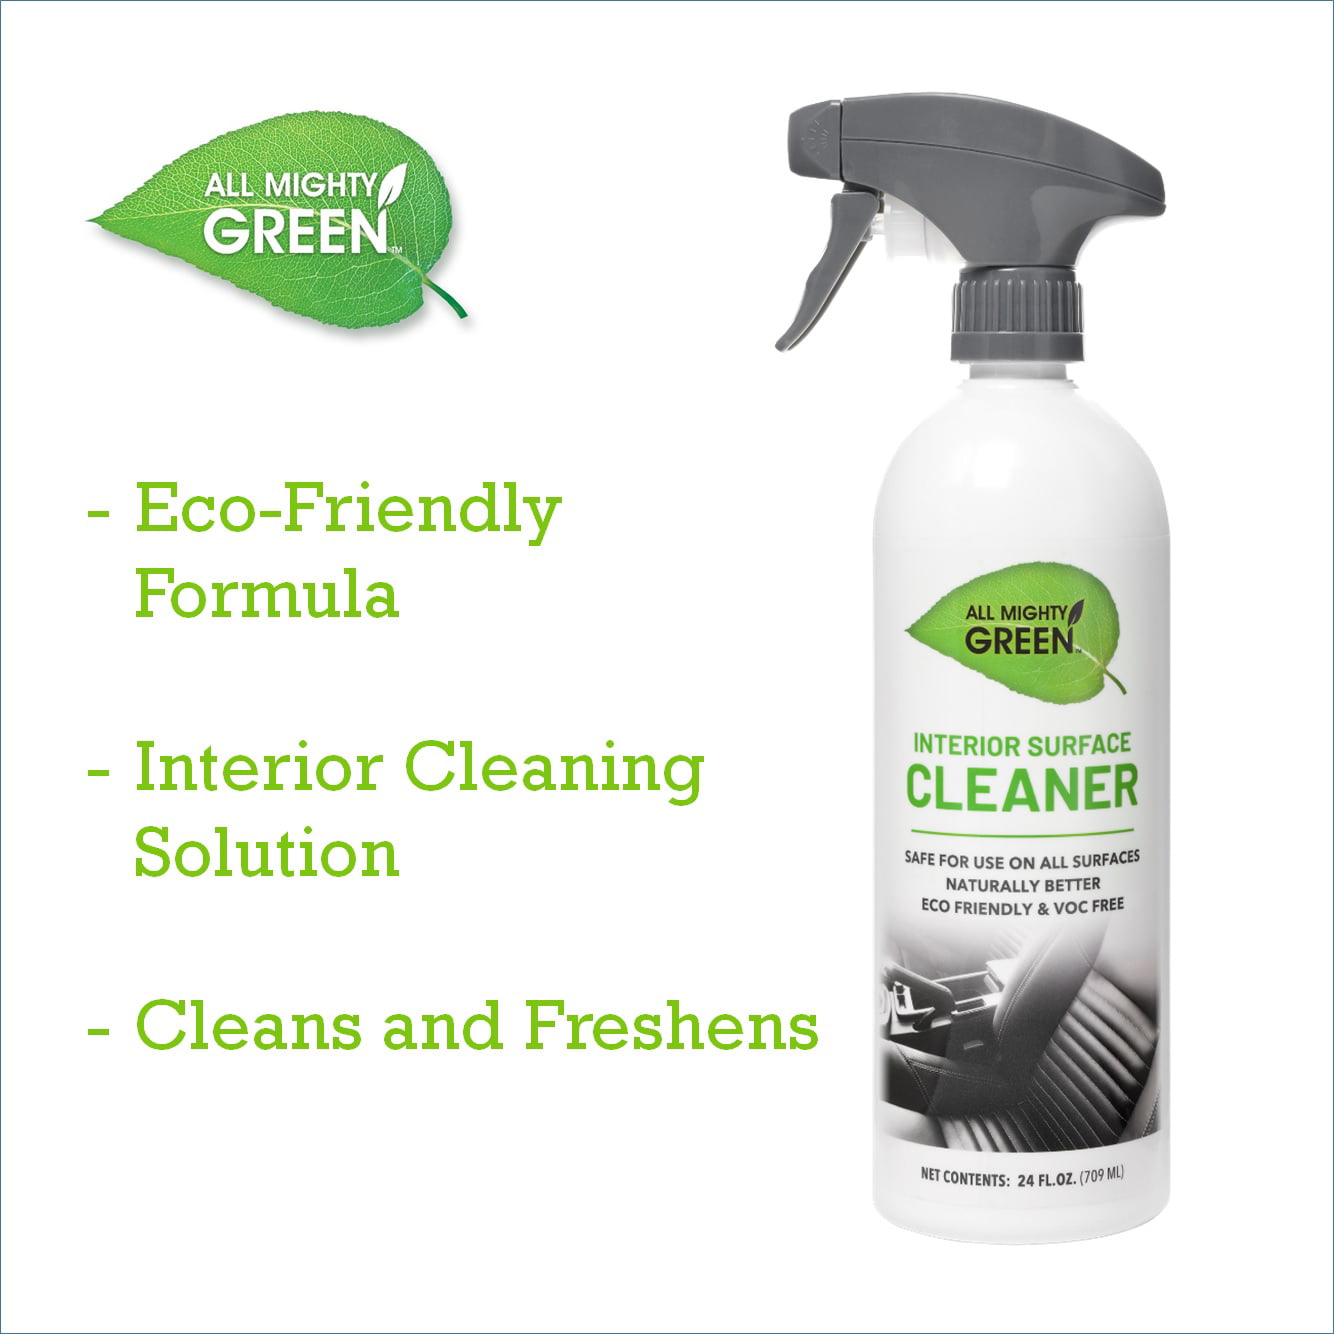  Green Cosmos. Ultimate Foam Cleaning Solutions: Mastering Shine  with All-Purpose, Heavy-Duty, and No-Rinse Excellence - Your Complete Guide  to Eelhoe, Multi-Purpose, and Car Care Foam Cleaners! : Automotive